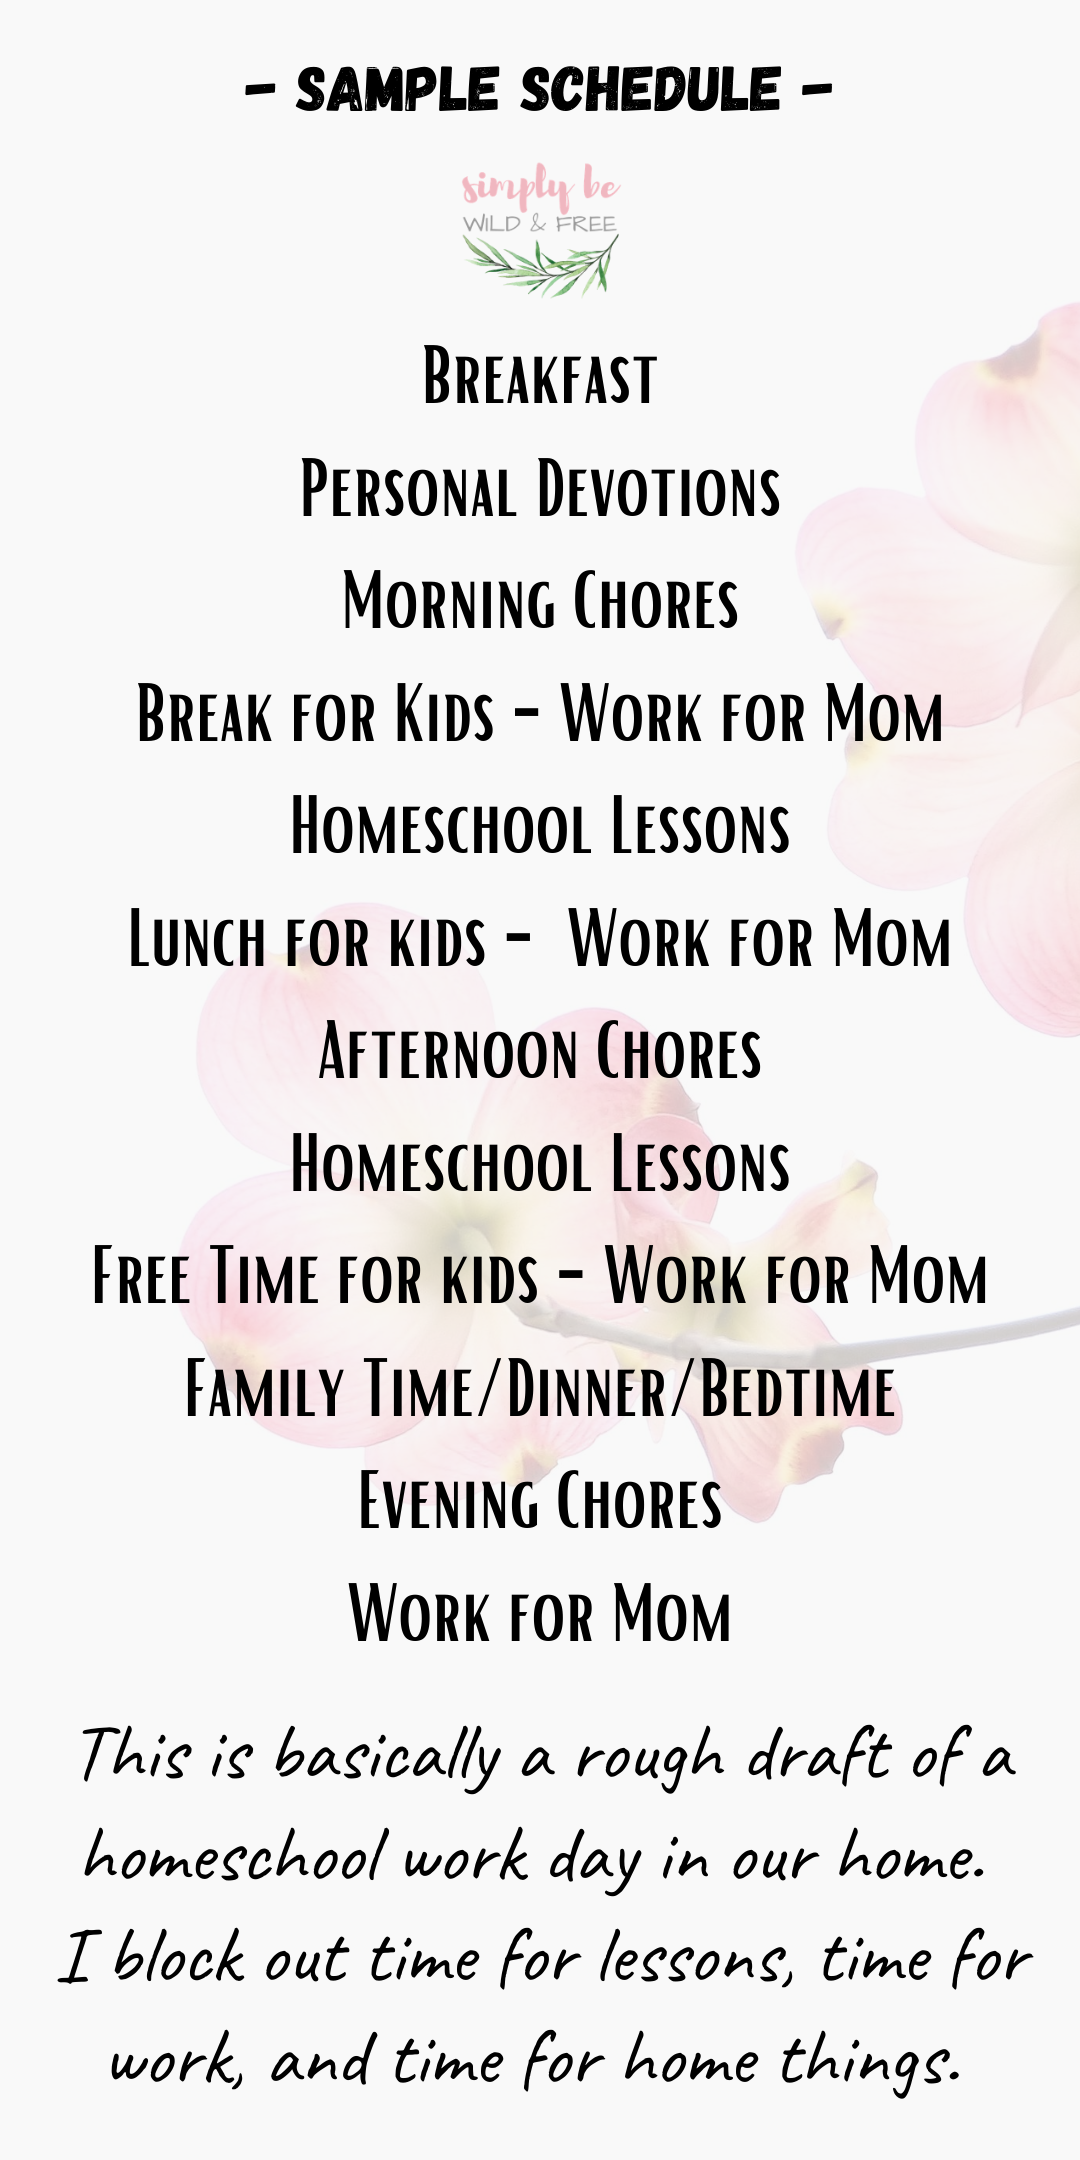 Sample-Schedule for Working from Home and Homeschooling